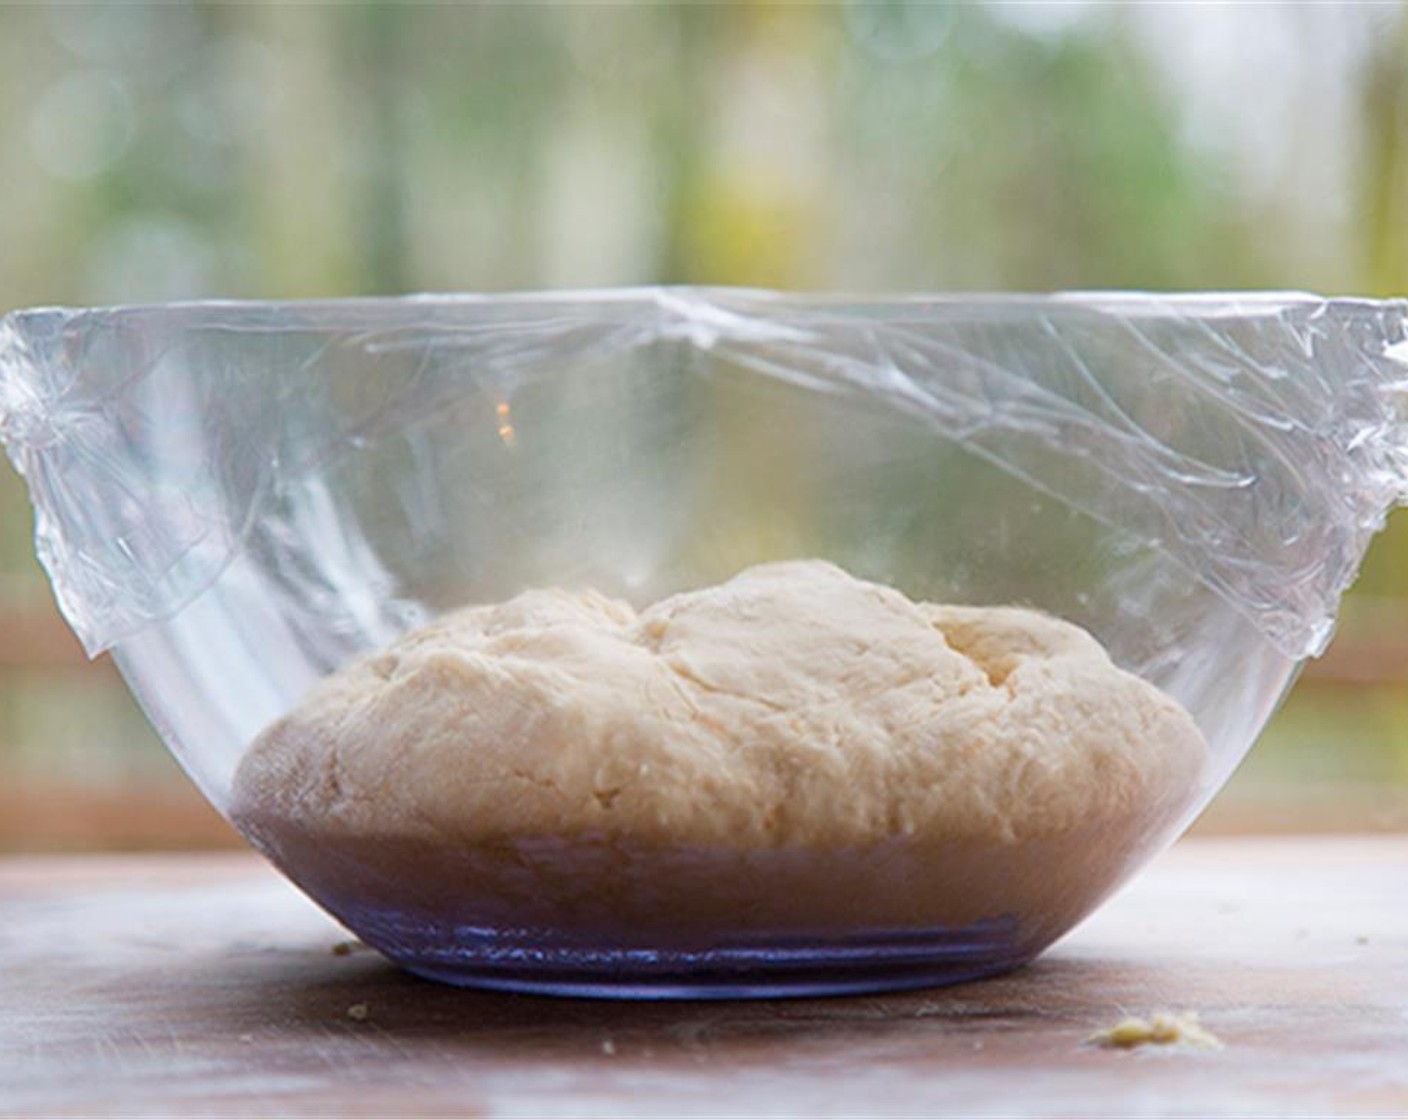 step 5 Place the dough into a large oiled bowl. Cover with a damp towel or plastic wrap, and let rise in a warm place until doubled in size, about 1 ½ hours.